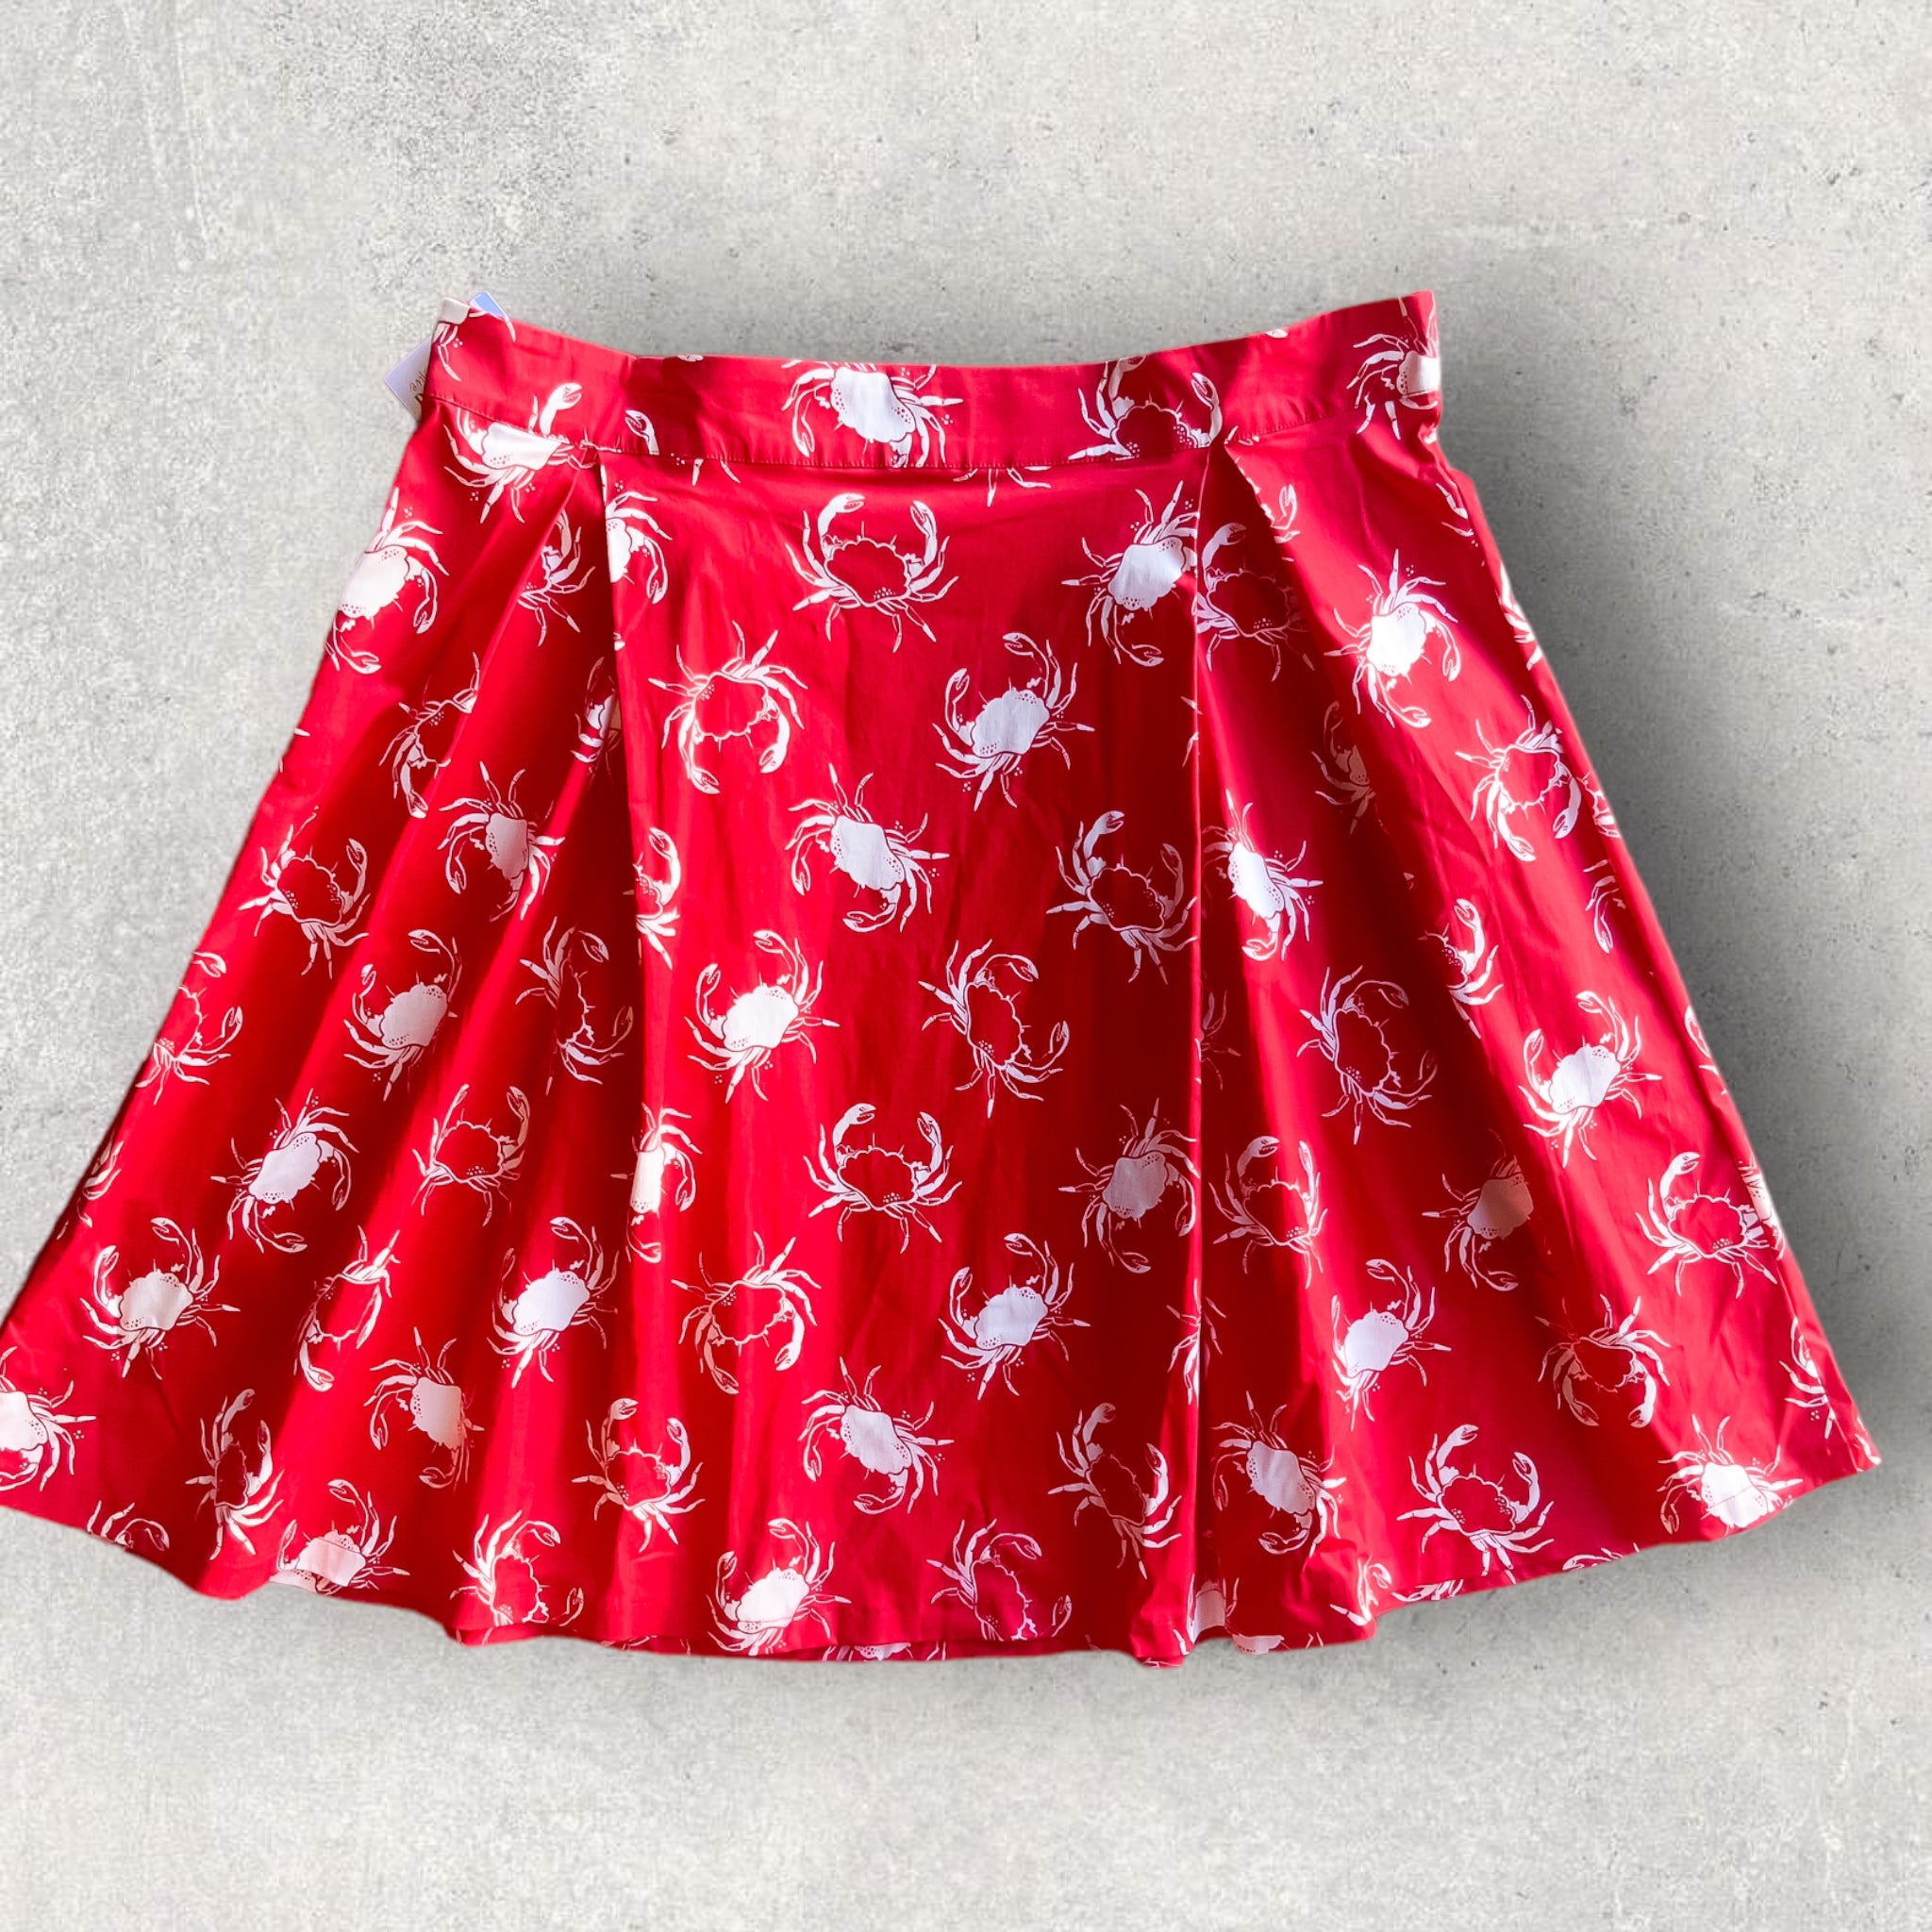 LINDY BOP 'Marie' Red Crab Print Swing Skirt - Size UK24